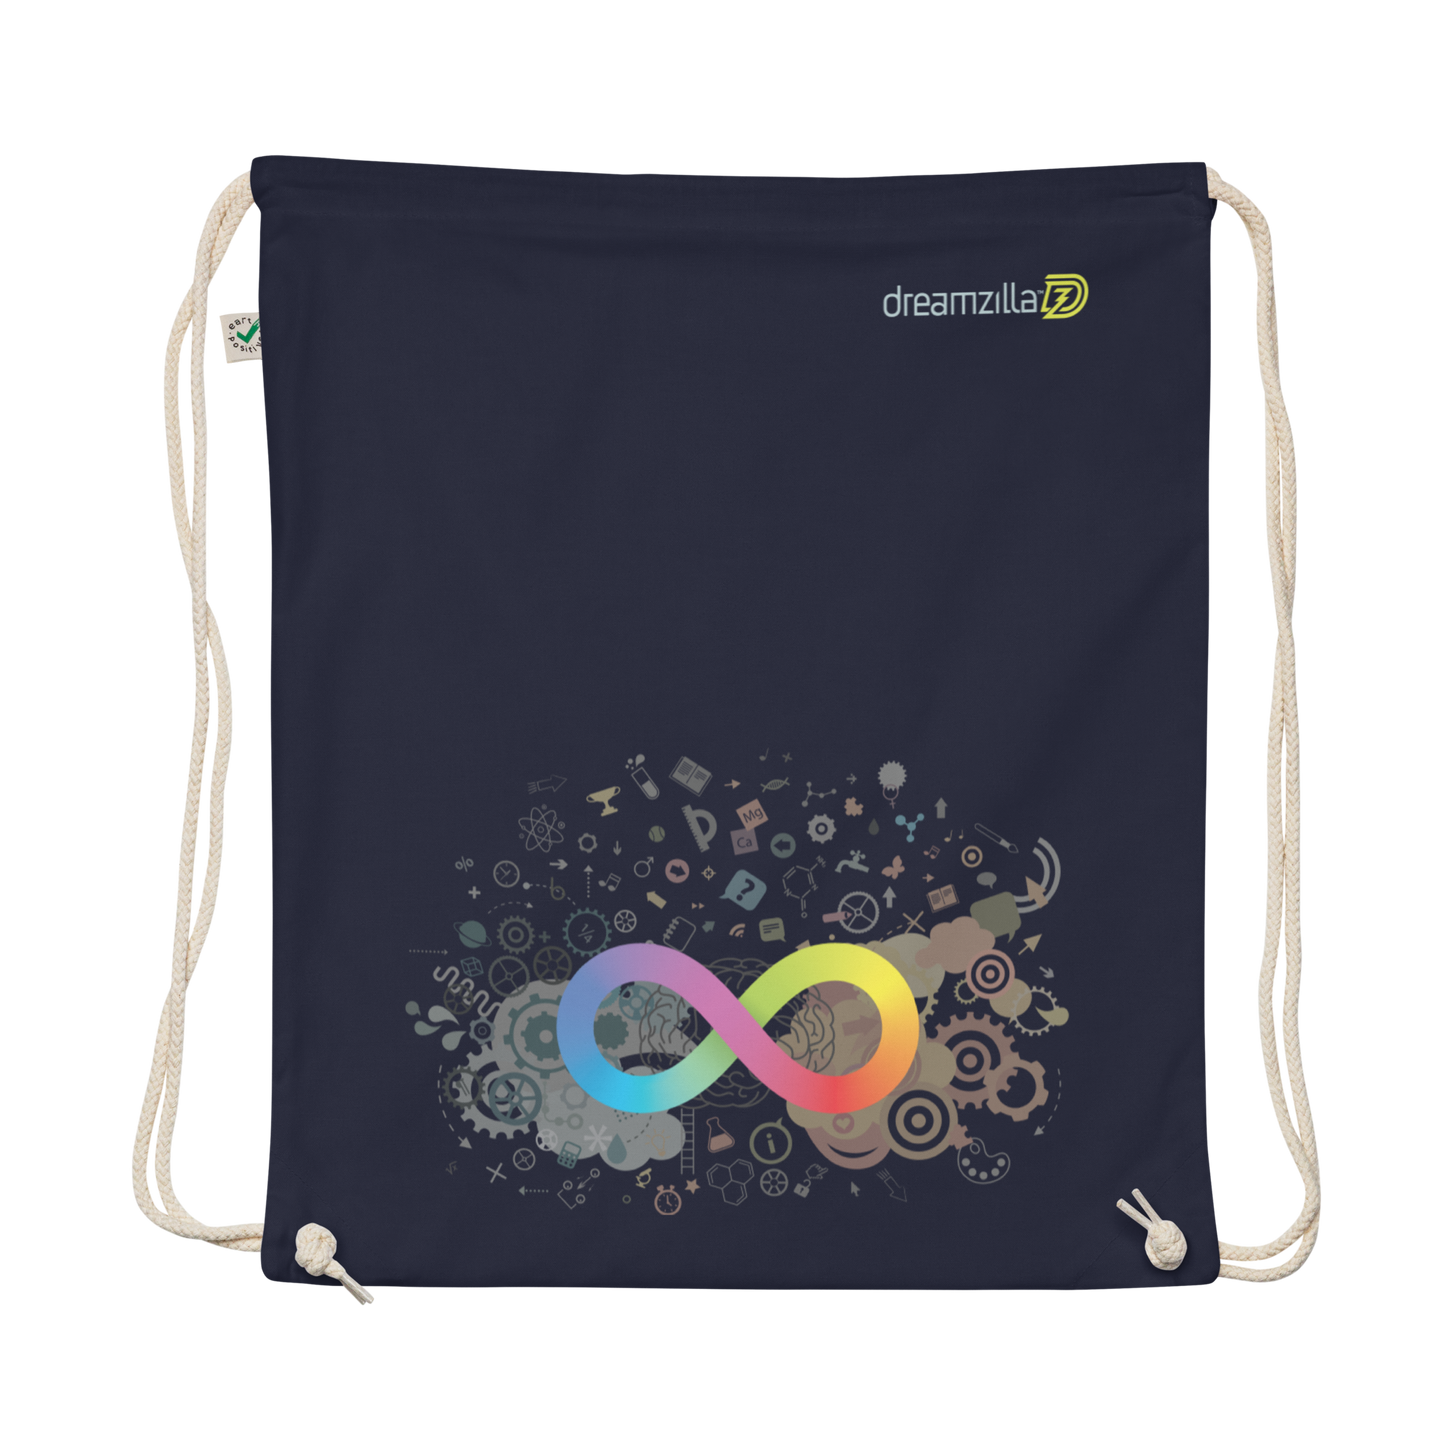 Flat view of Neurodiversity Rainbow Infinity EarthPositive Cotton Drawstring Bag in Navy